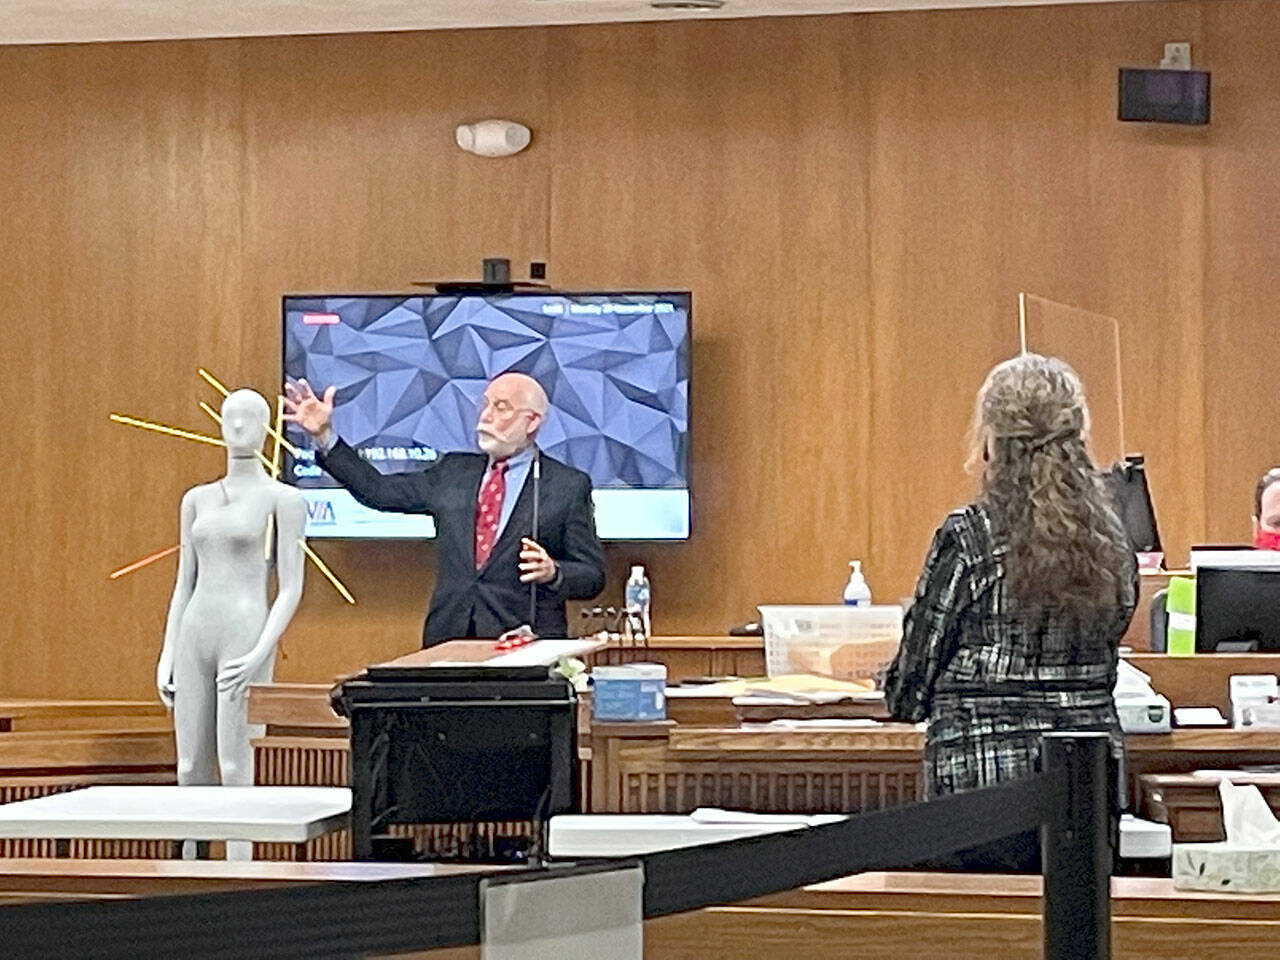 Dr. Eric Kiesel, the medical examiner who performed autopsies on the bodies of Tiffany May and Darrell and Jordan Iverson in January 2019, uses a manikin to show the trajectory of bullets during Dennis Mavin Bauer’s triple murder trial  in Clallam County Superior Court. Michele Devlin, county chief criminal deputy prosecuting attorney, looks on. (Rob Ollikainen/ for Peninsula Daily News)